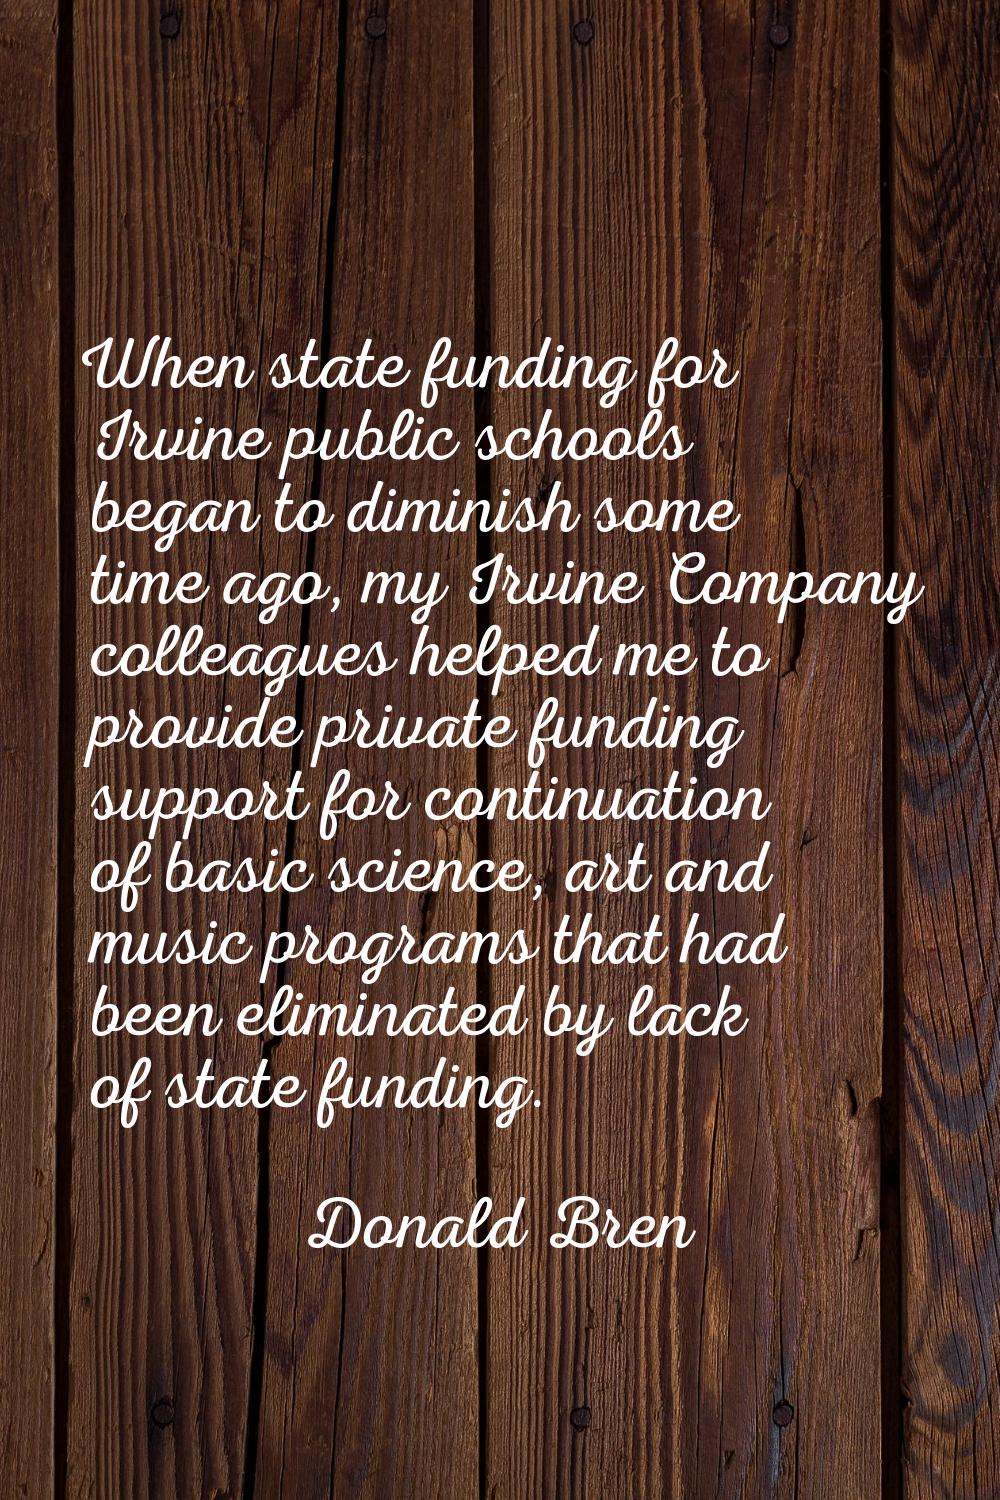 When state funding for Irvine public schools began to diminish some time ago, my Irvine Company col